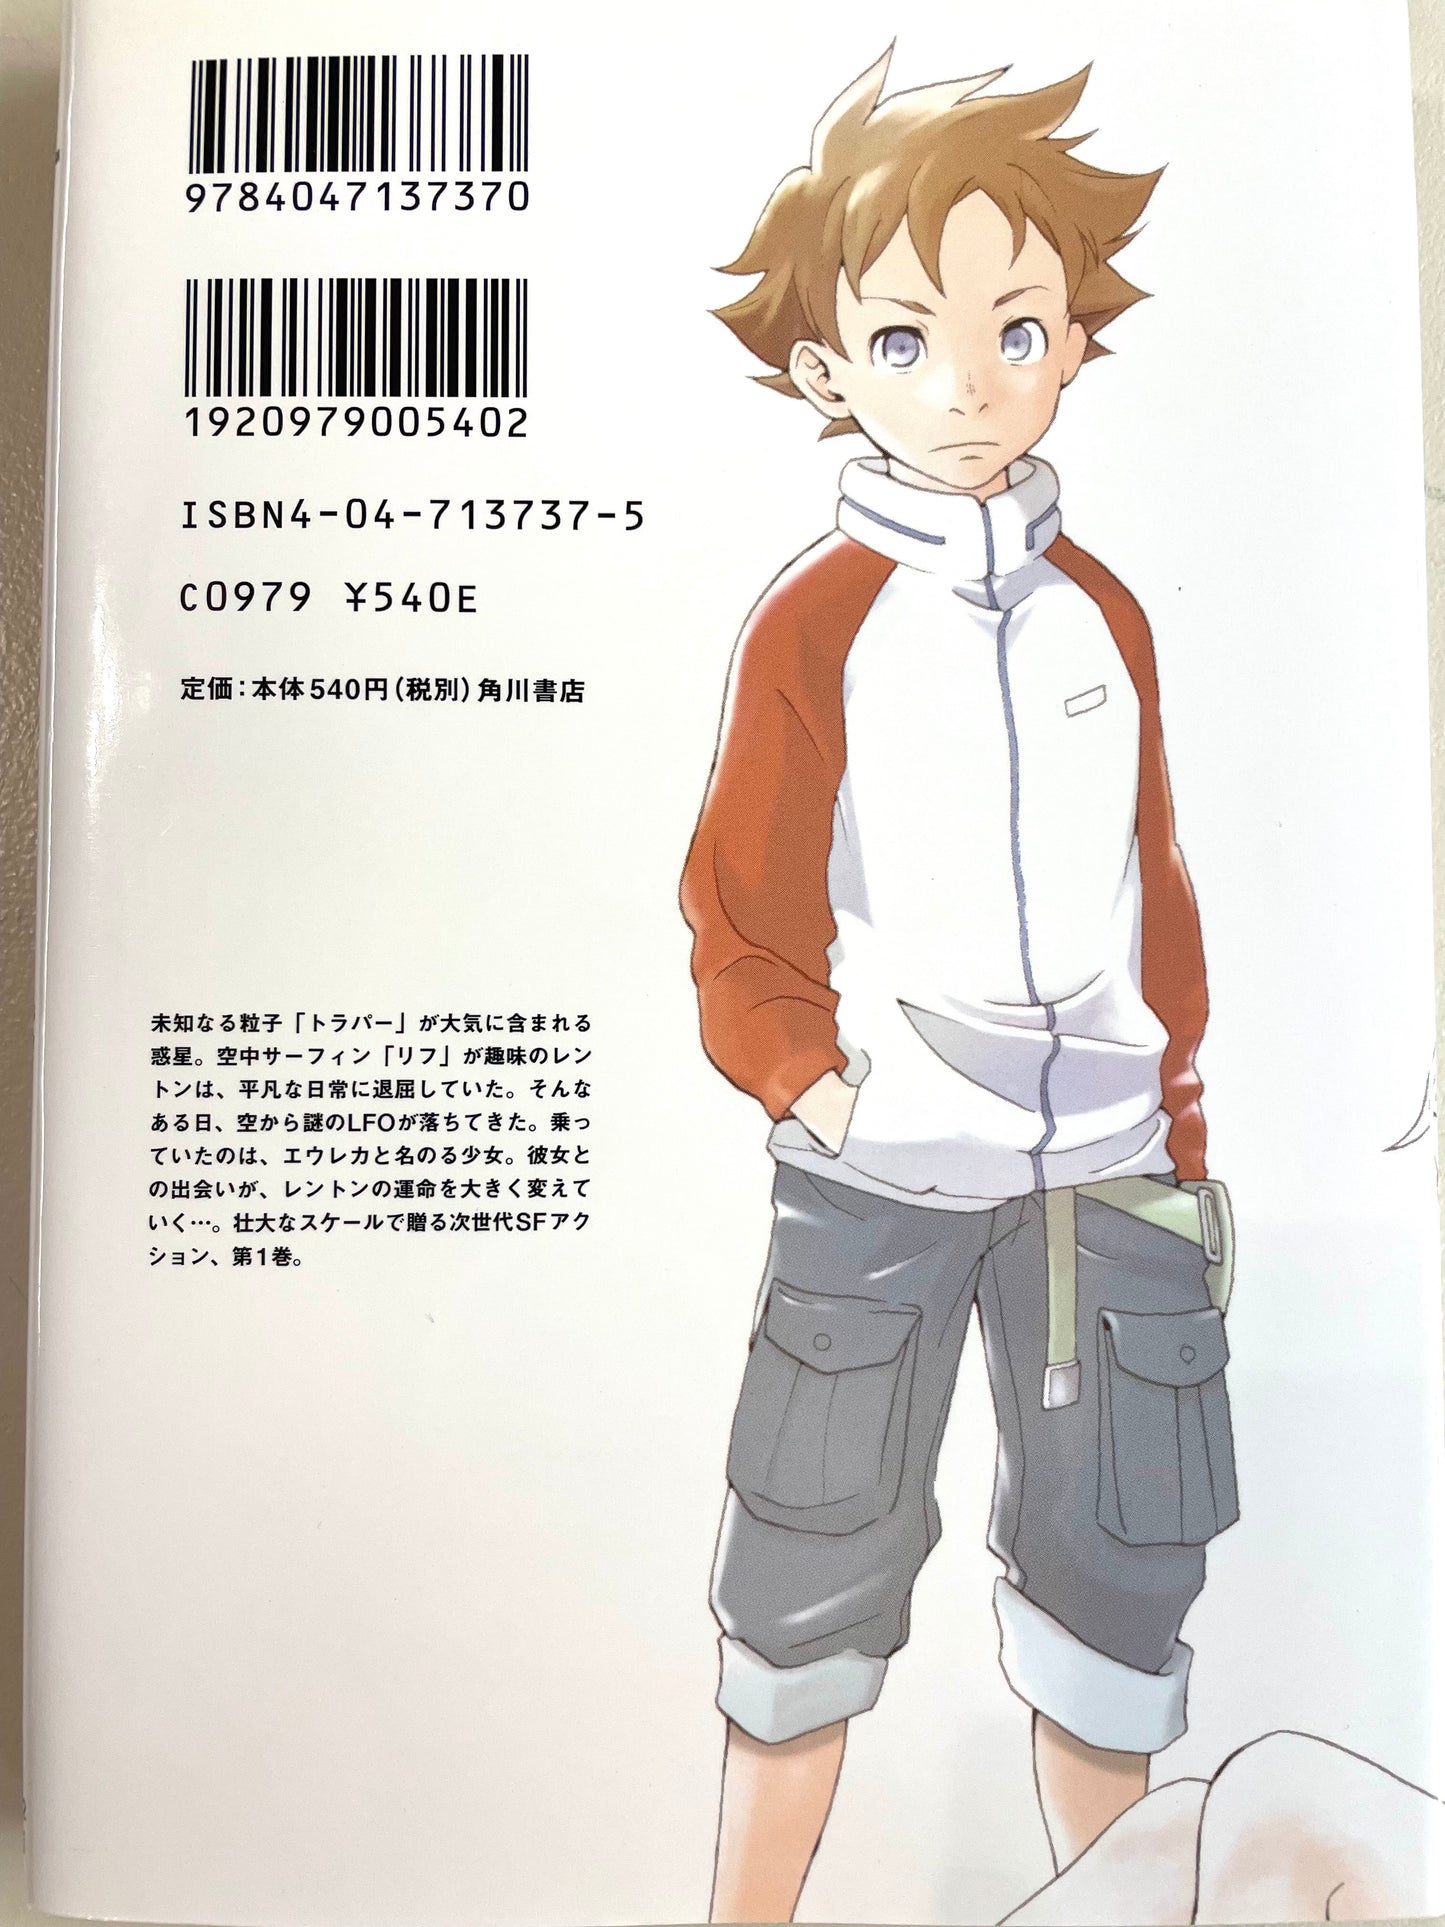 Psalms of Planets Eureka seveN Vol.1-Official Japanese Edition